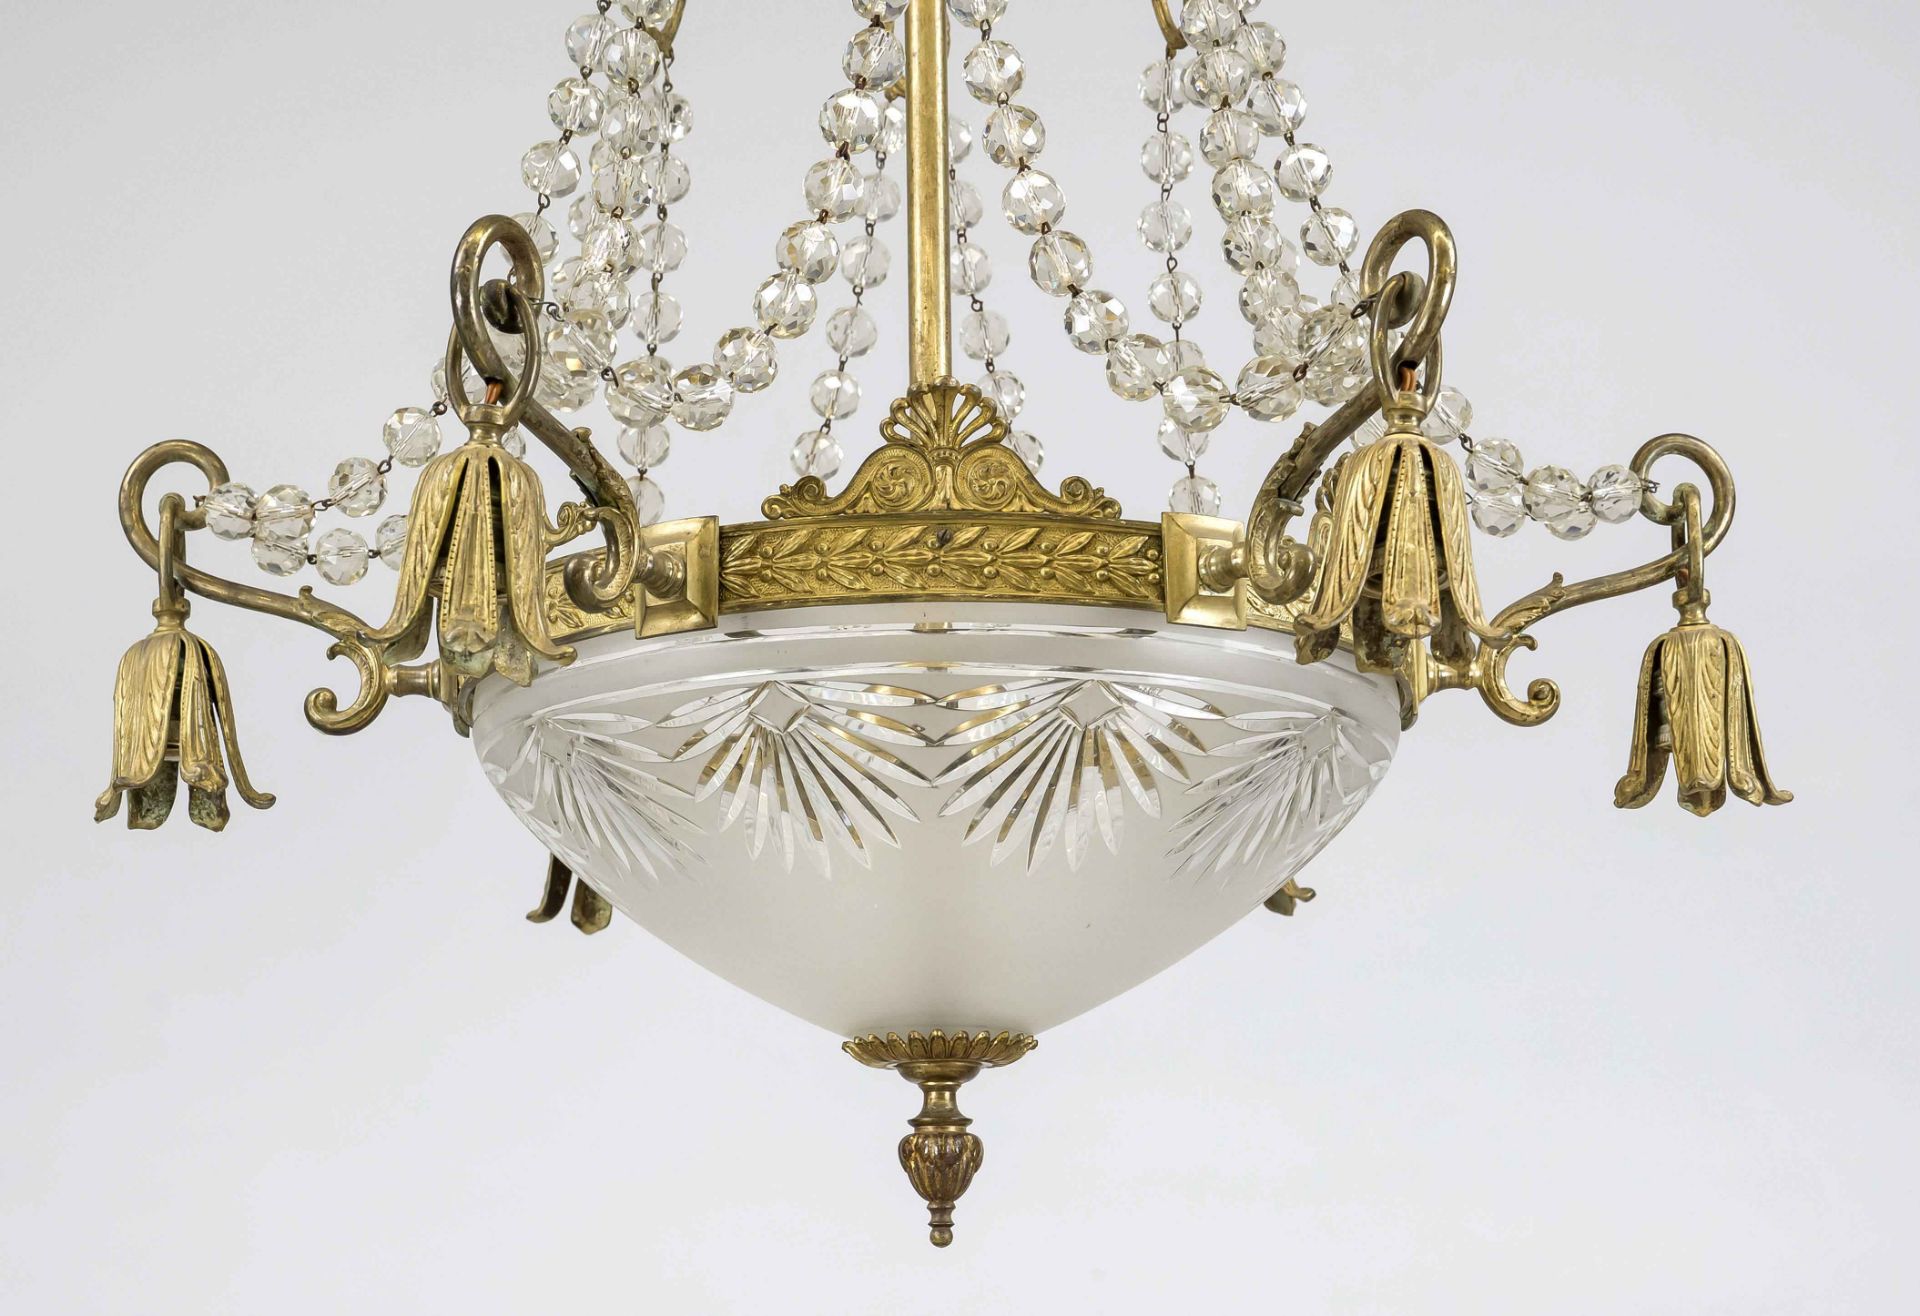 Large ceiling lamp, late 19th century. Large, ornamented wreath with palmettes and remnants of - Image 2 of 2